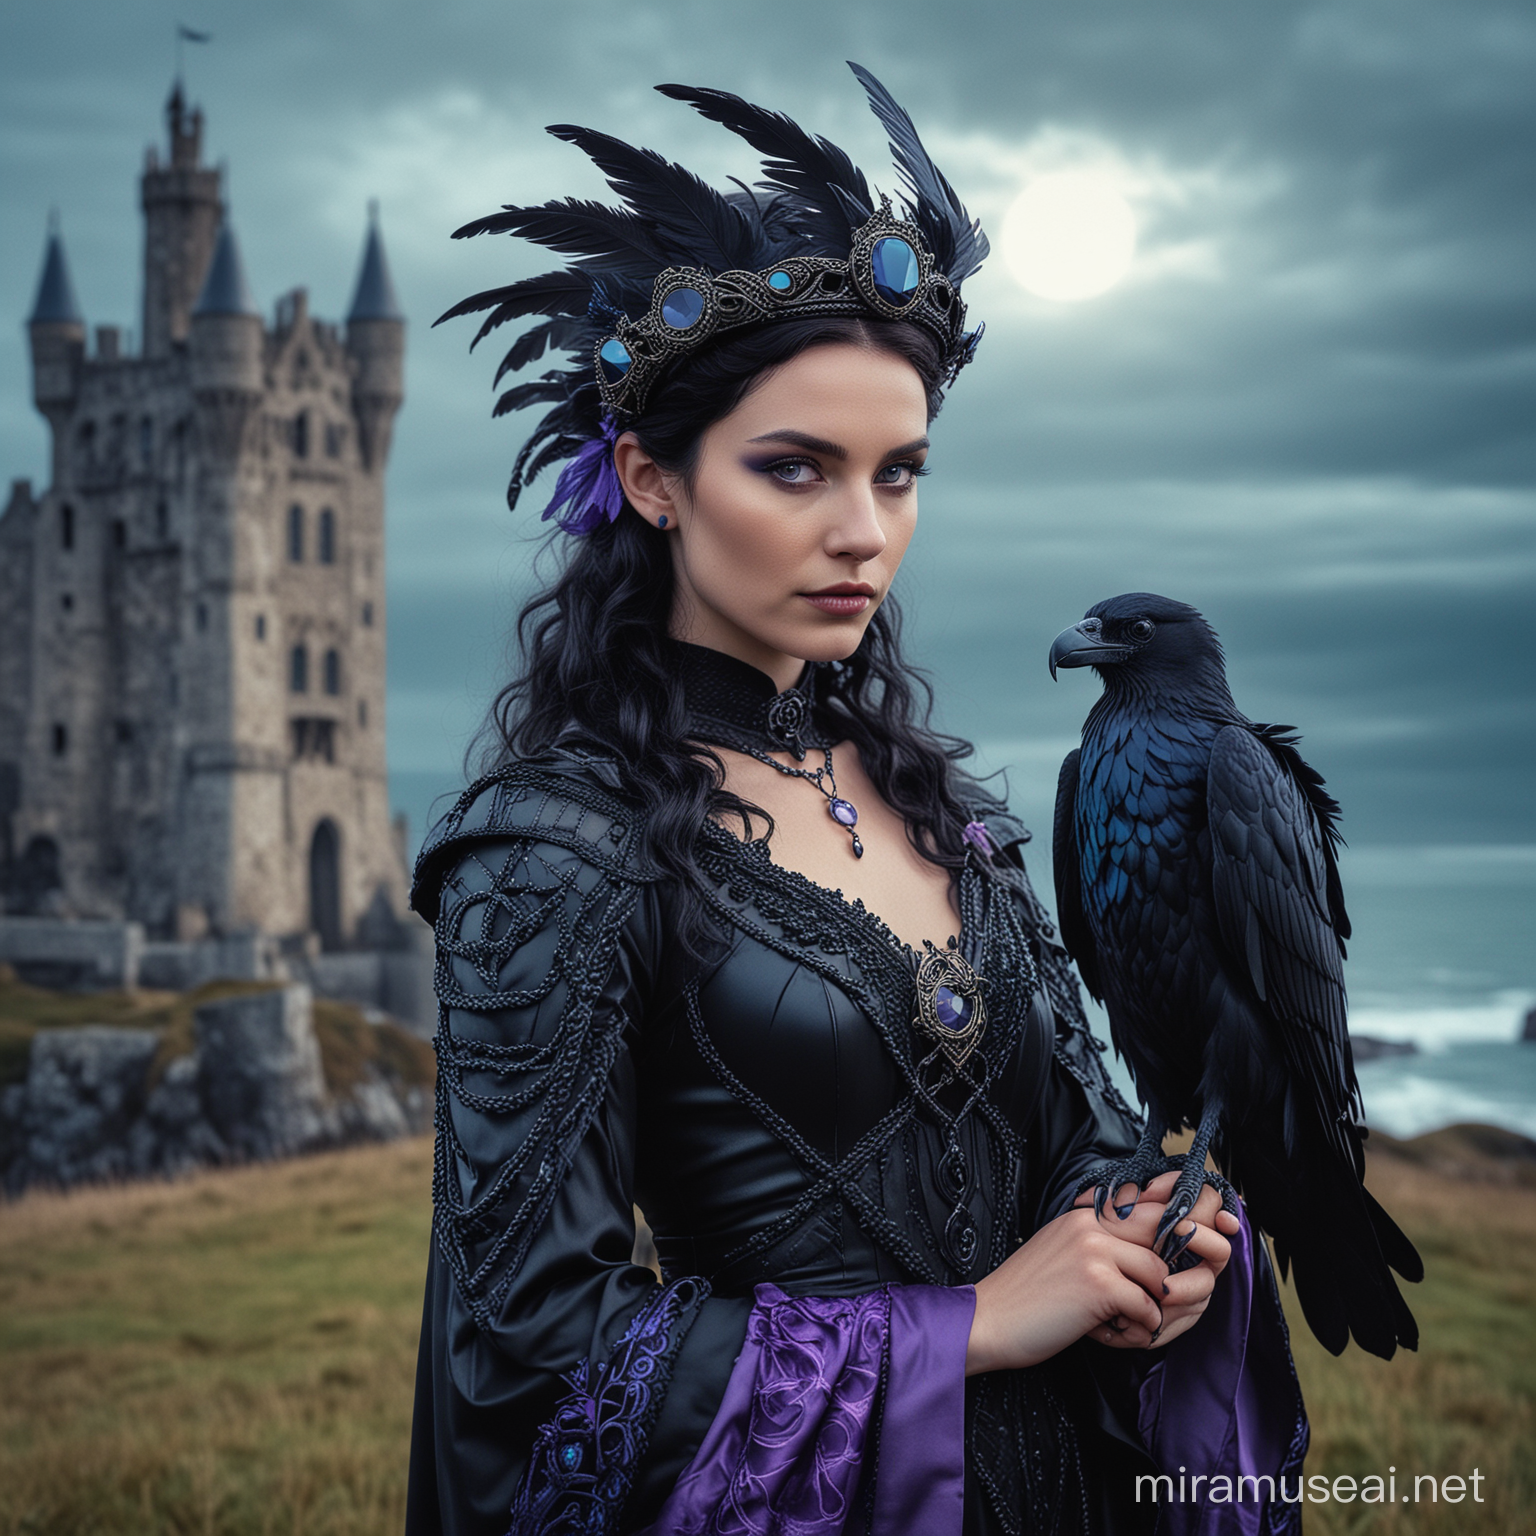 A gorgeous glowing Celtic Raven Queen wearing an artistic contemporary couture raven fashion headpiece in black & blue , holding a cute tiny black golden iriscentdent dragon in arm, gloomy ocean & castle background in violett wes anderson color palette, 35mm photography